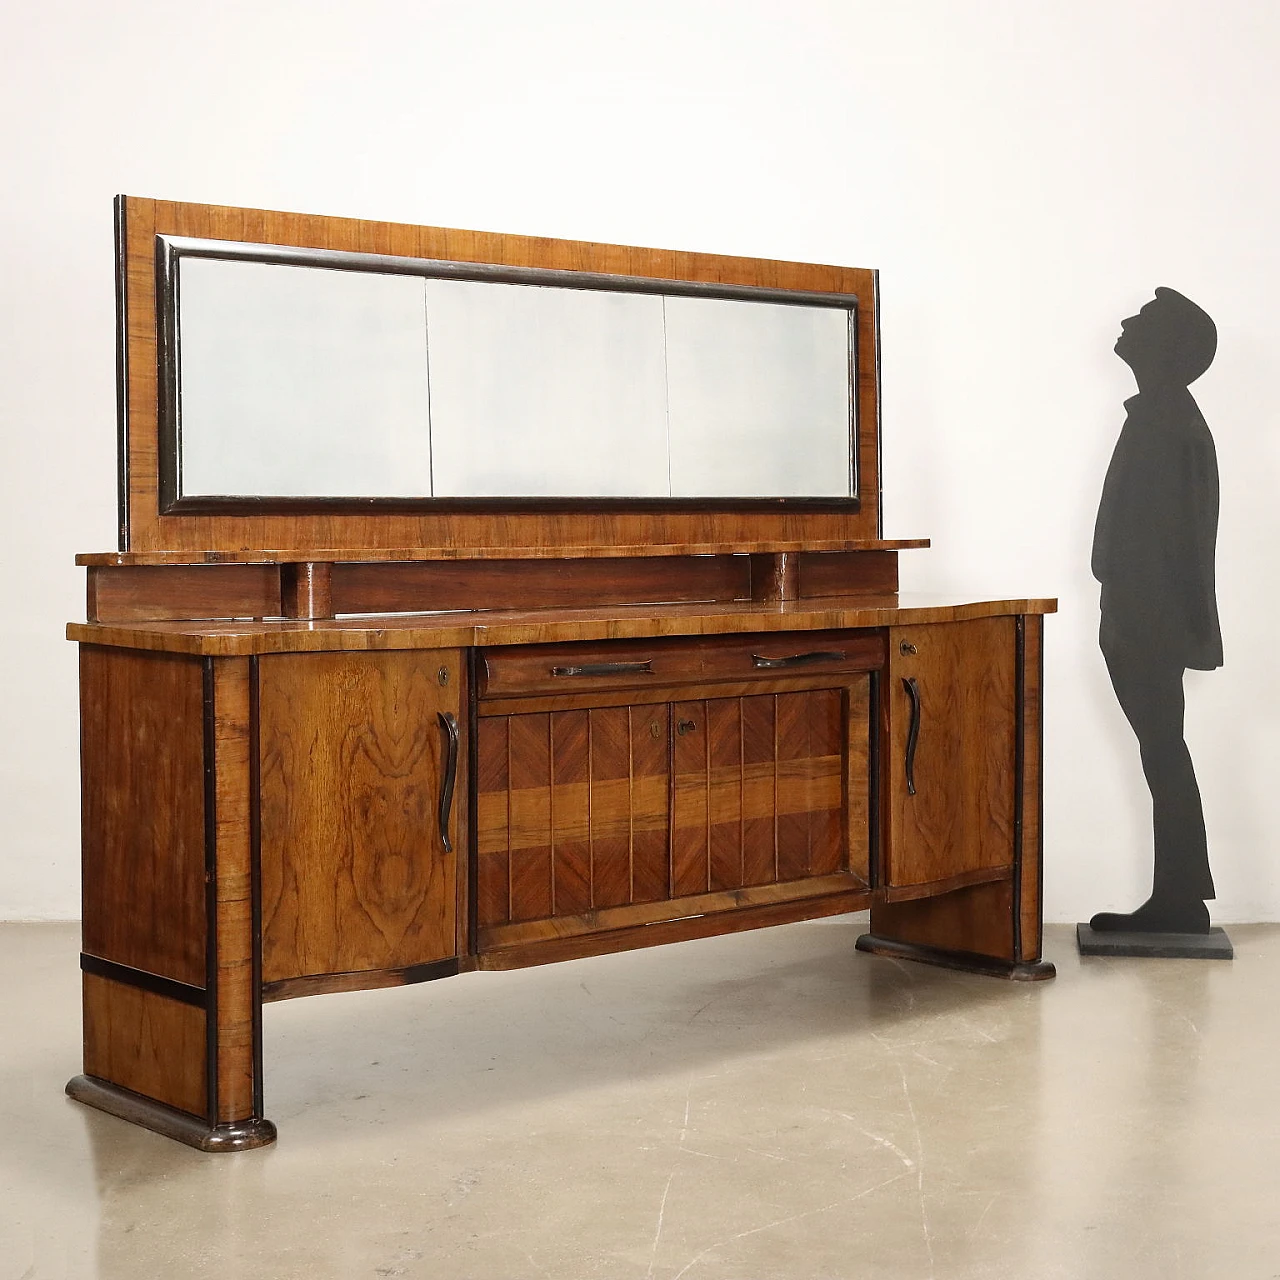 Walnut and briarwood sideboard with riser and mirror, 1920s 2